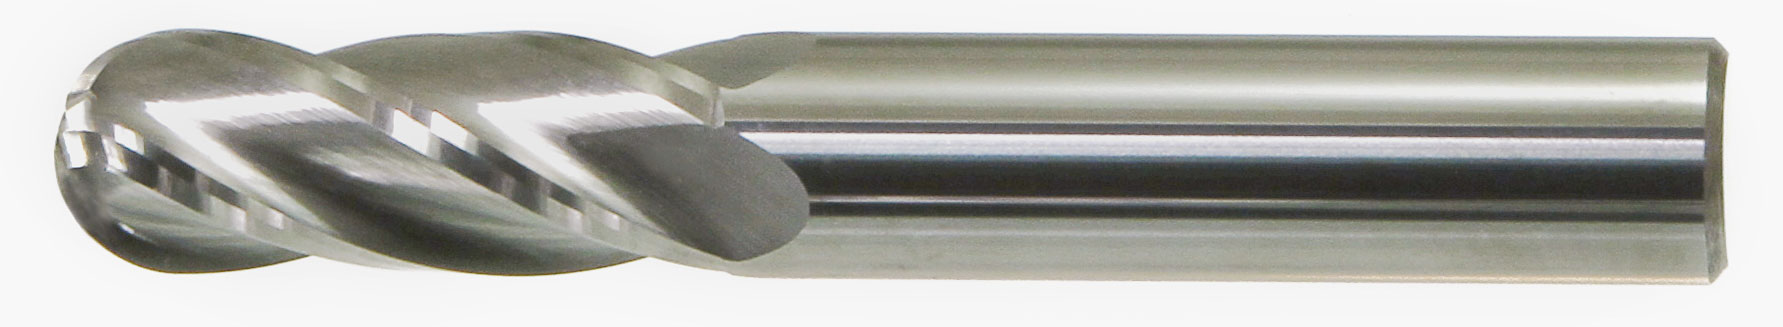 Cleveland C41377 HG-4B High Speed Steel Single End Multi-Flute Center Cutting Ball Nose Finisher End Mill Greenfield Industries